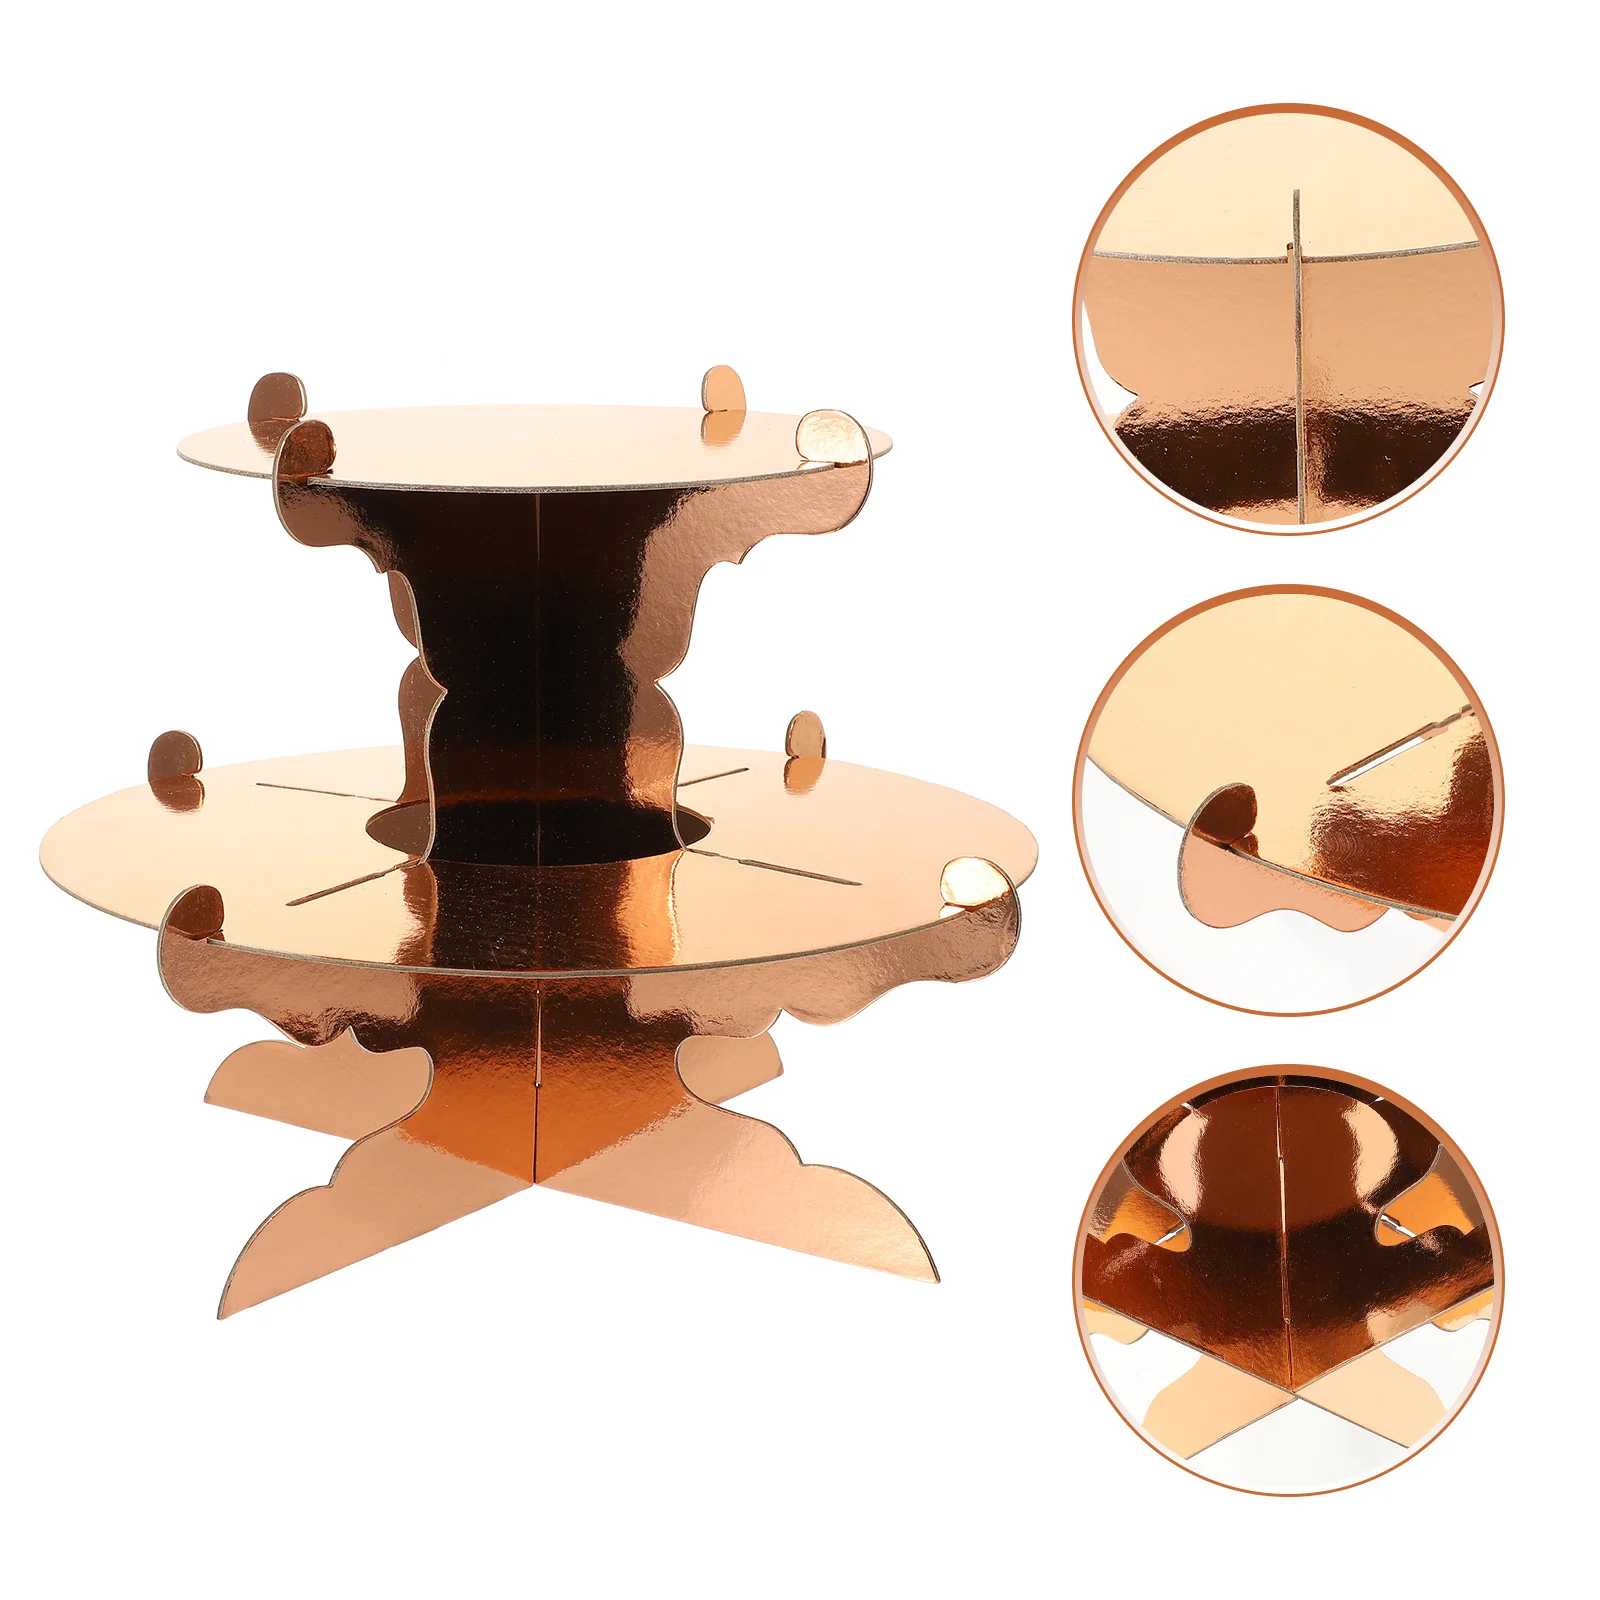 

Stand Cupcake Cake Dessert Display Tower Cardboard Holder Stands Party Serving Tier Wedding Towers Plate Tea Tray Pastry Round